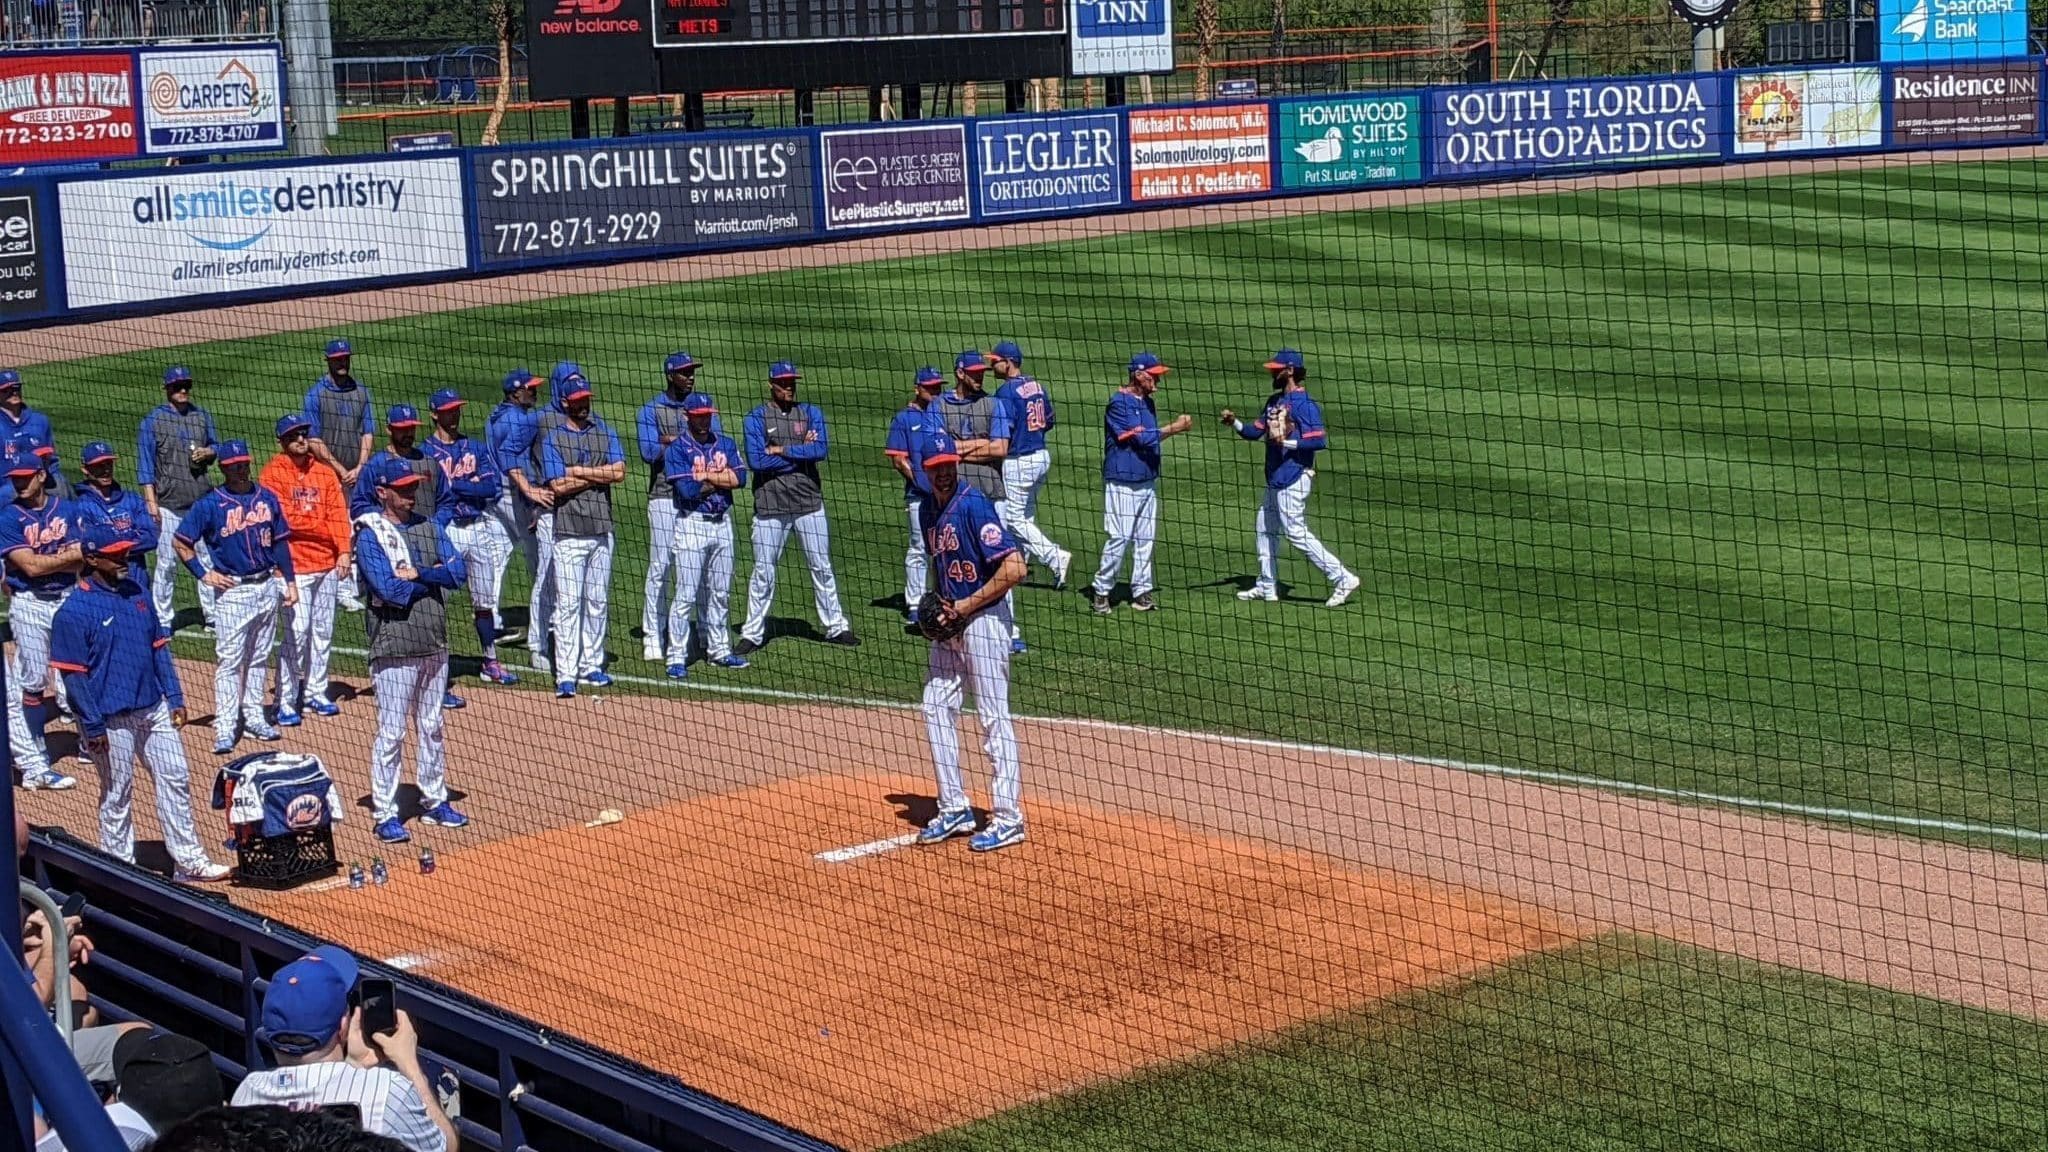 New York Mets Ace Jacob deGrom warming up prior to his spring training debut 2020